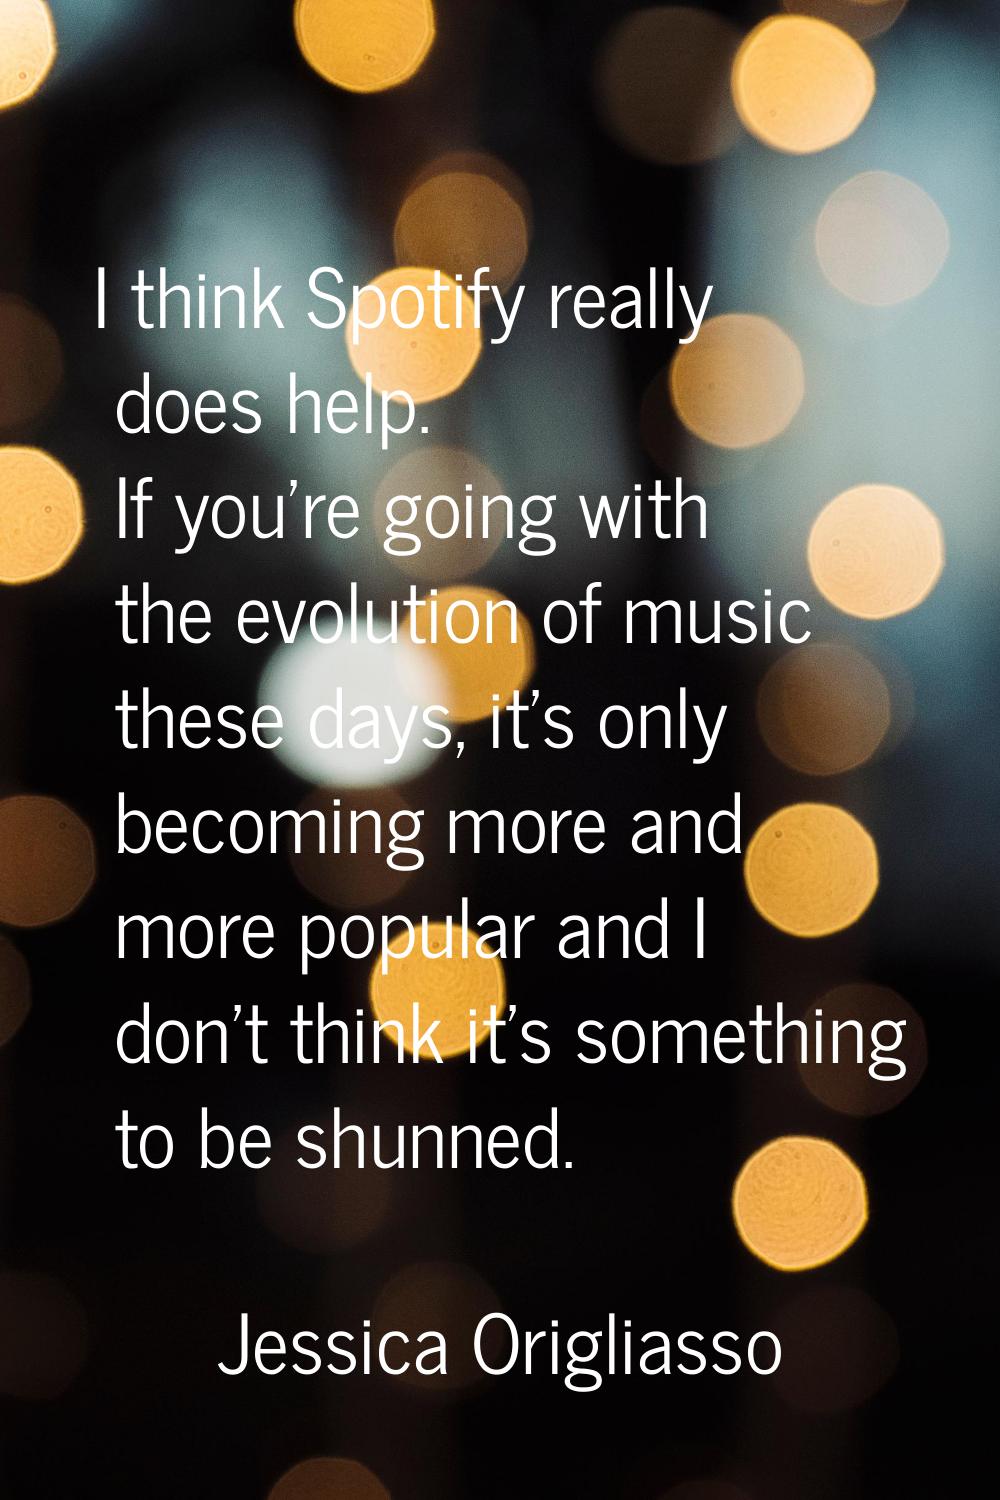 I think Spotify really does help. If you're going with the evolution of music these days, it's only